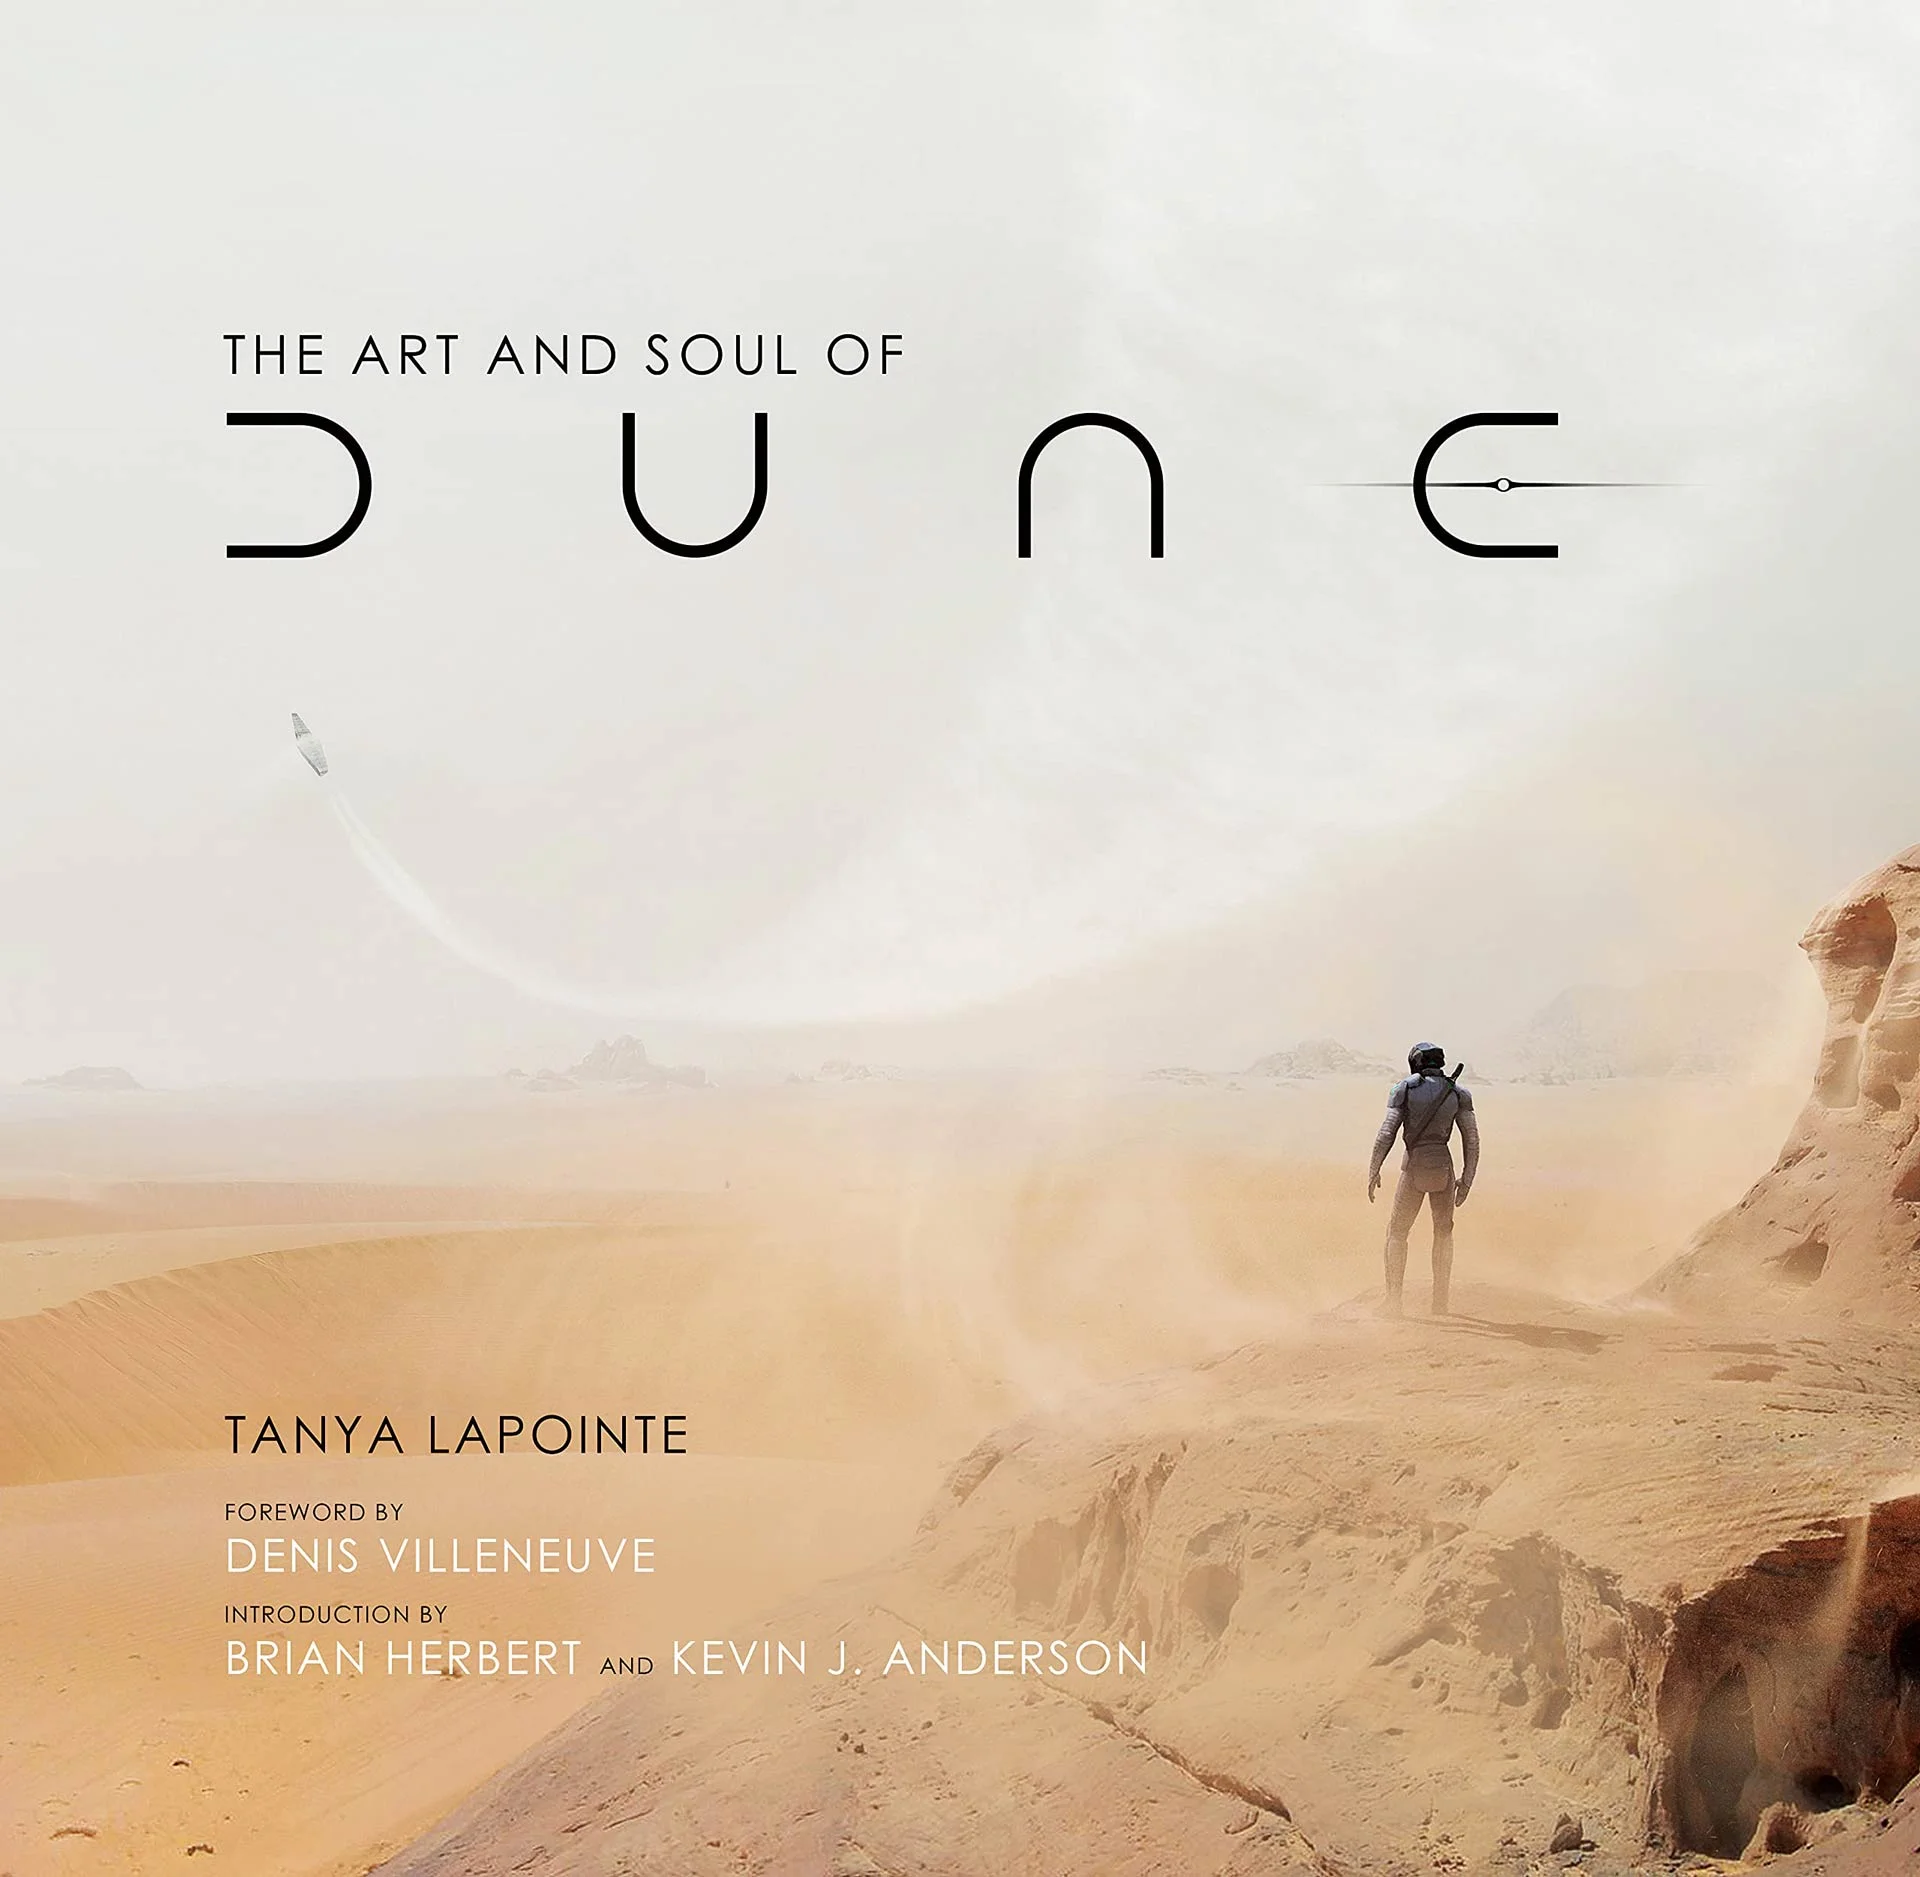 Interior art from the 'The Art and Soul of Dune' book, written by Tanya Lapointe.